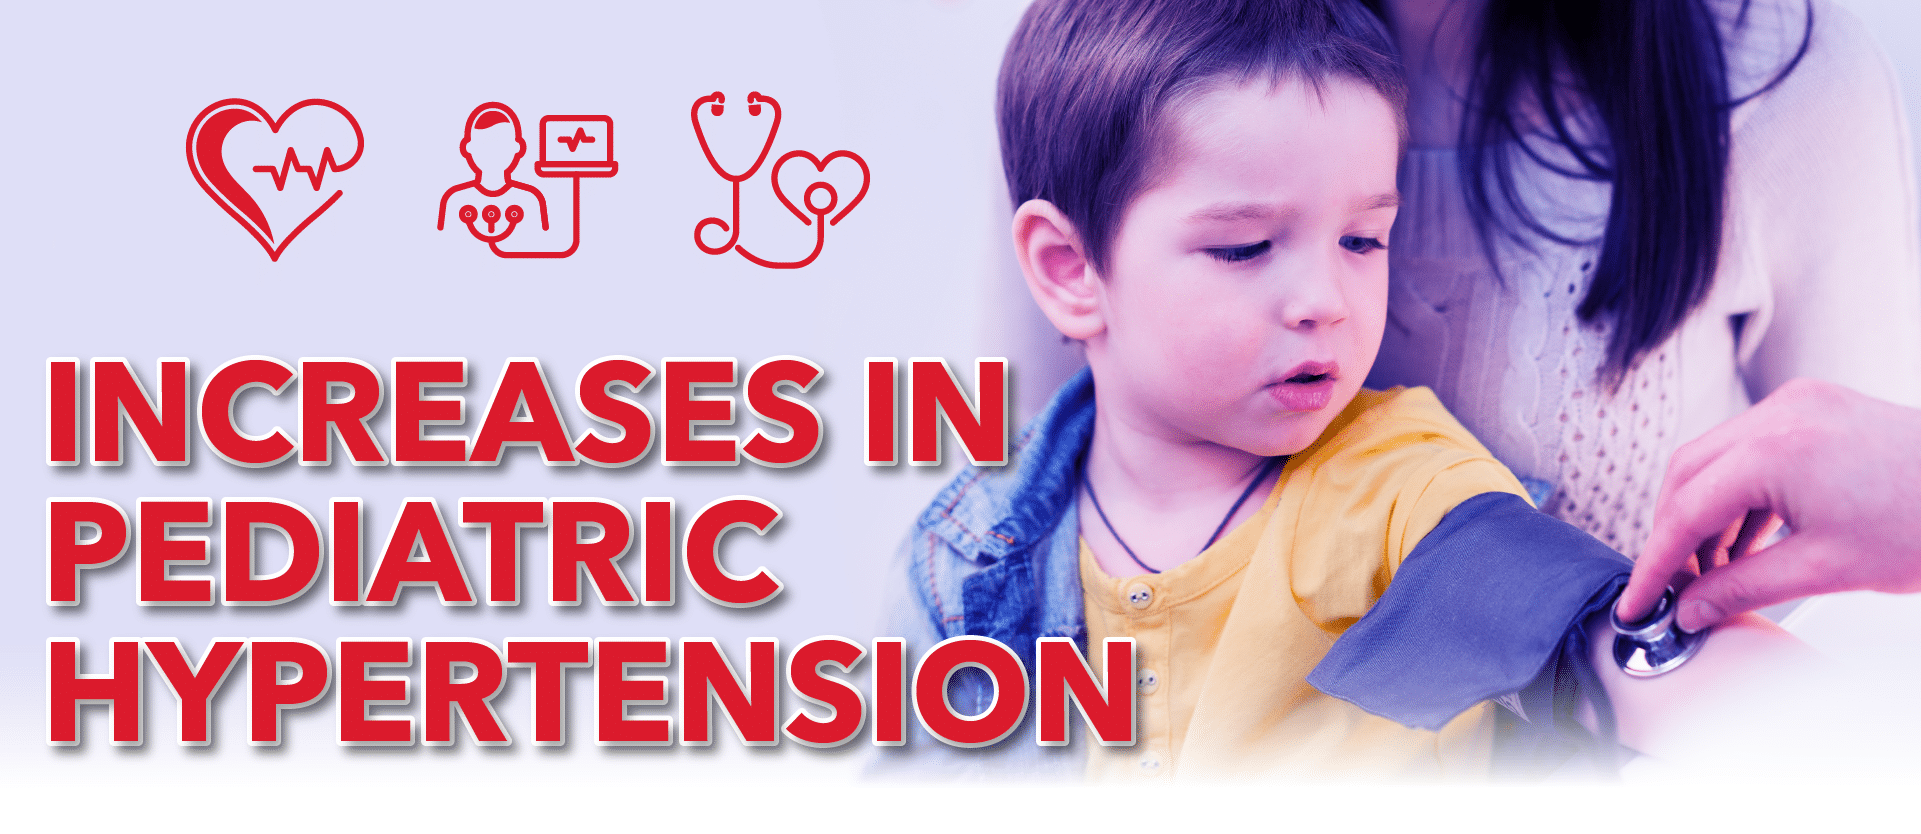 Hypertension in Kids and Teenagers